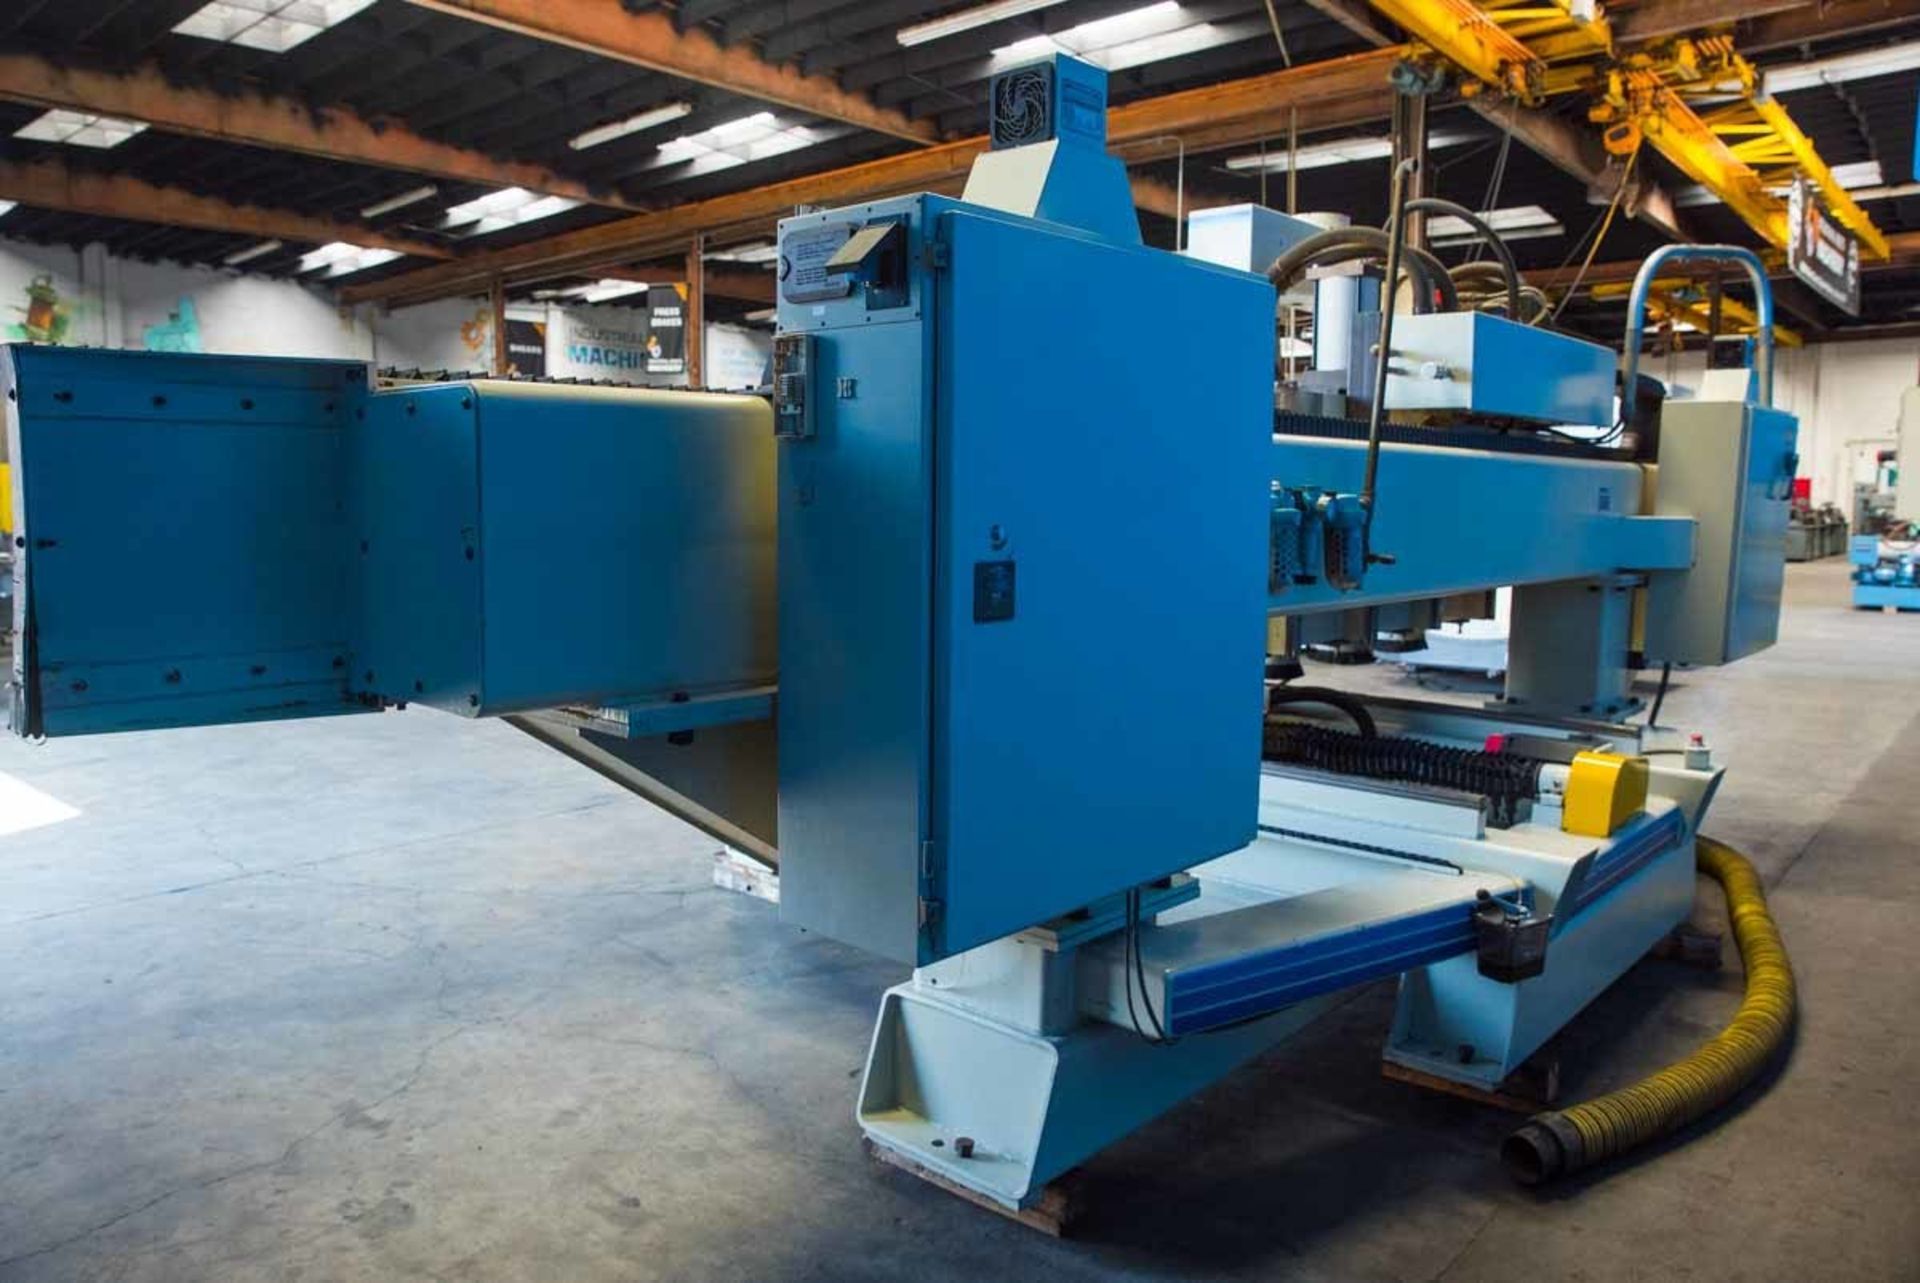 Komo VR805Q Fanuc CNC Metal Router 3 Axis 4 Spindle 96" x 60" Sheet Size - Located In: Huntington - Image 5 of 25